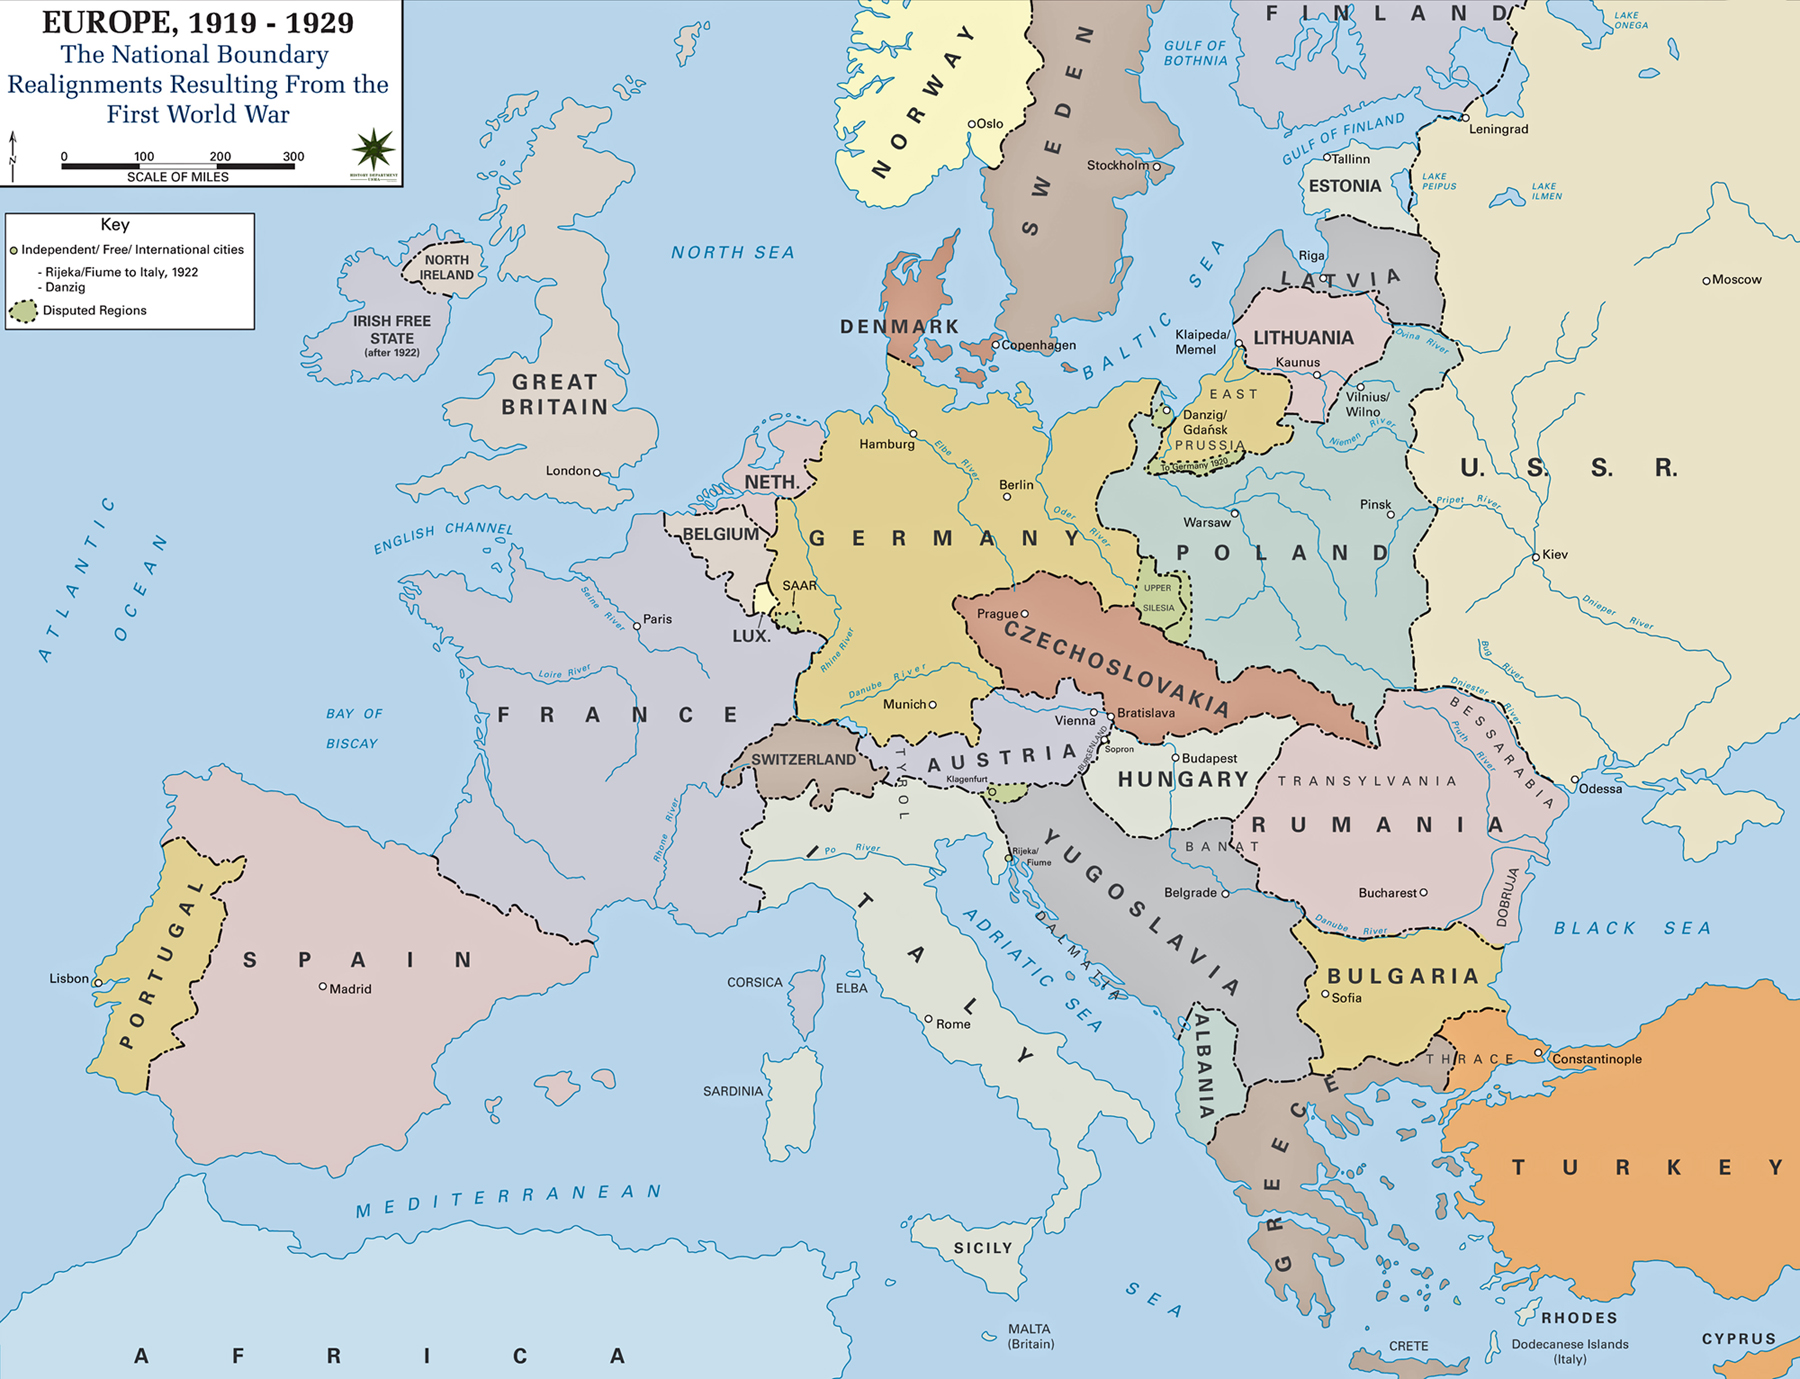 Map of Europe 1919-1929